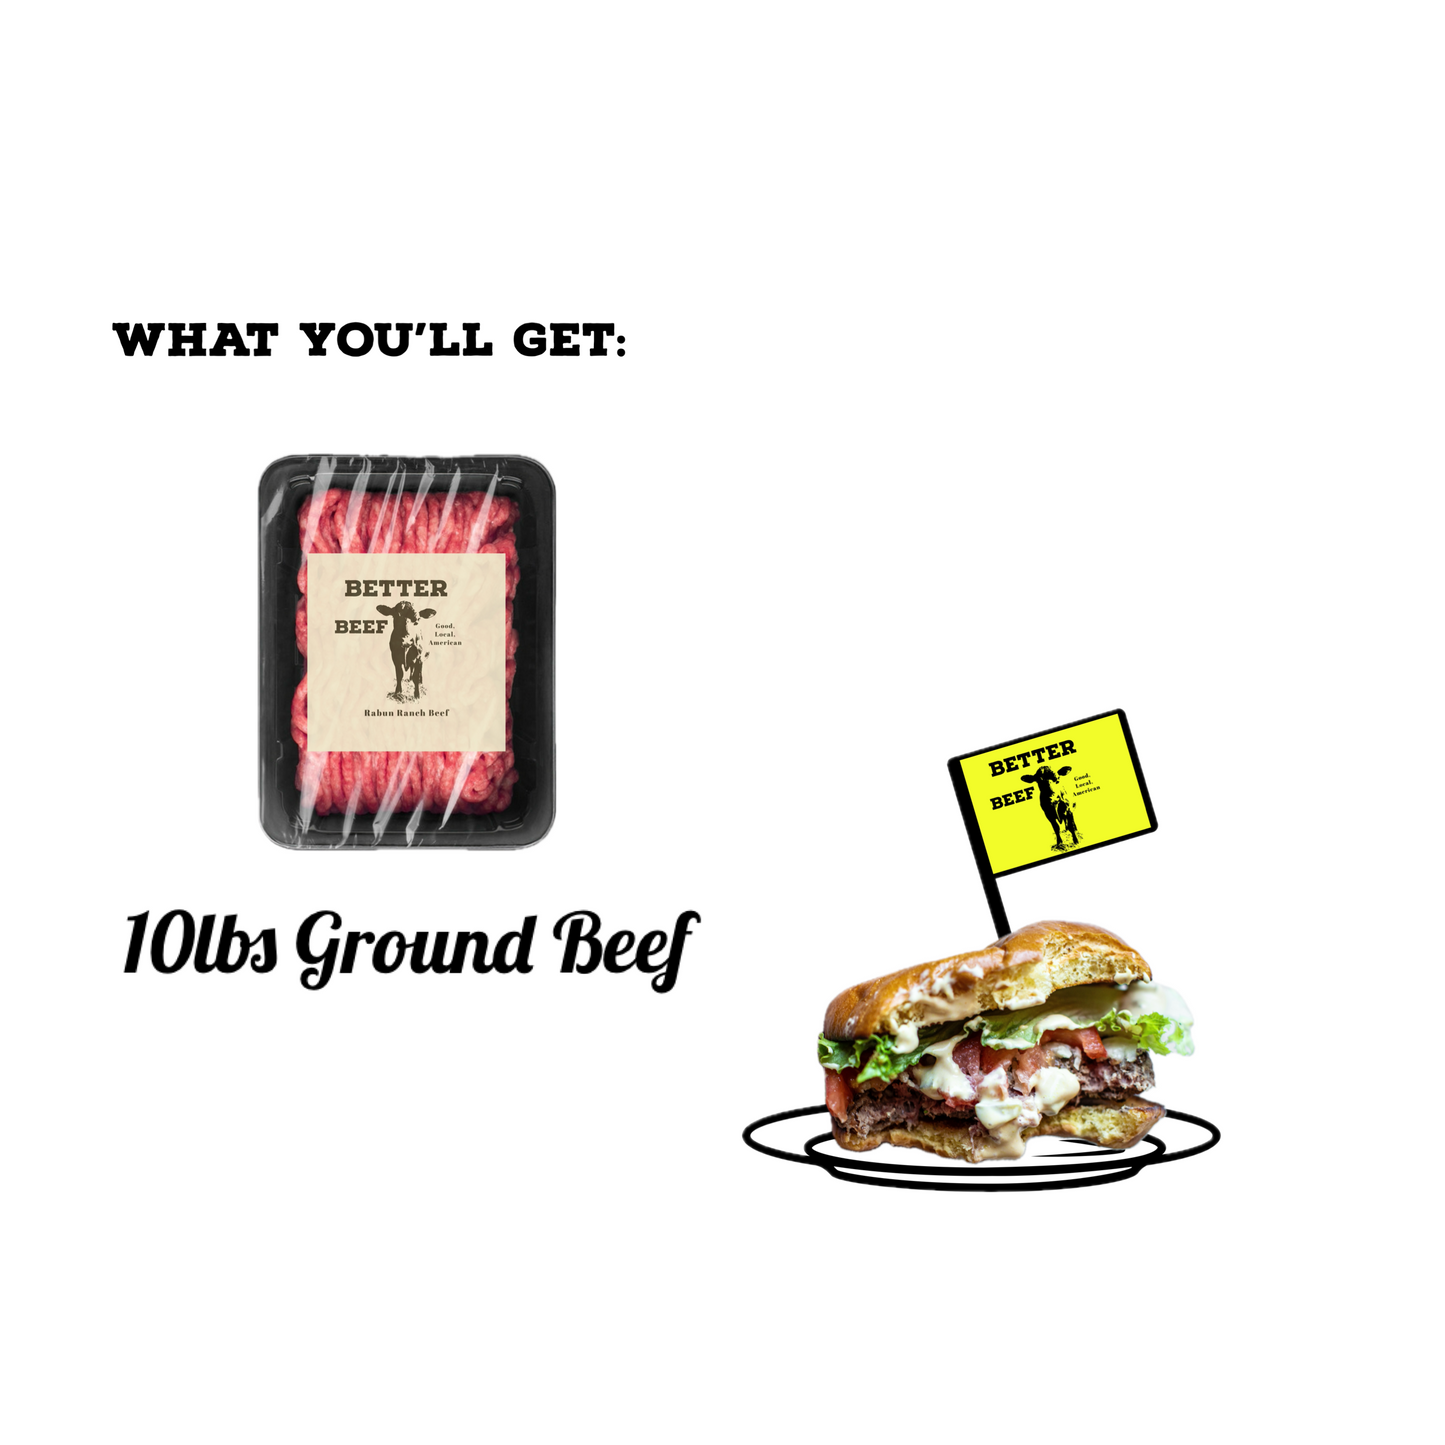 10 LBS. of Delicious, Lean Ground Round Hamburger Meat